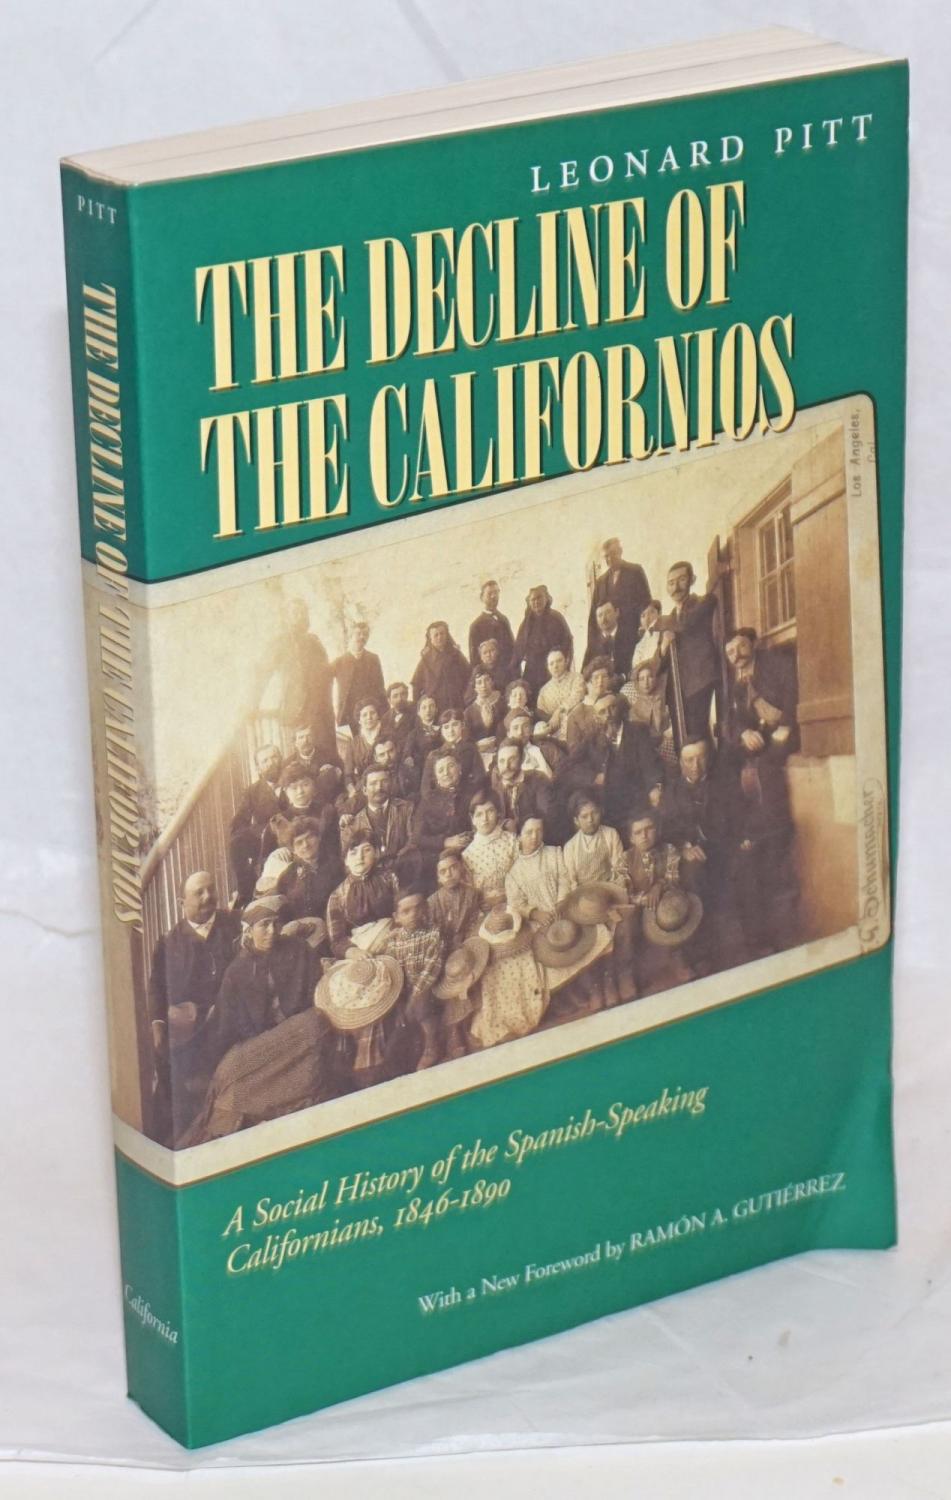 The Decline of the Californios; A Social History of the Spanish-speaking Californians, 1846-1890. Updated with a new foreword by Ramon A. Gutierrez - Pitt, Leonard